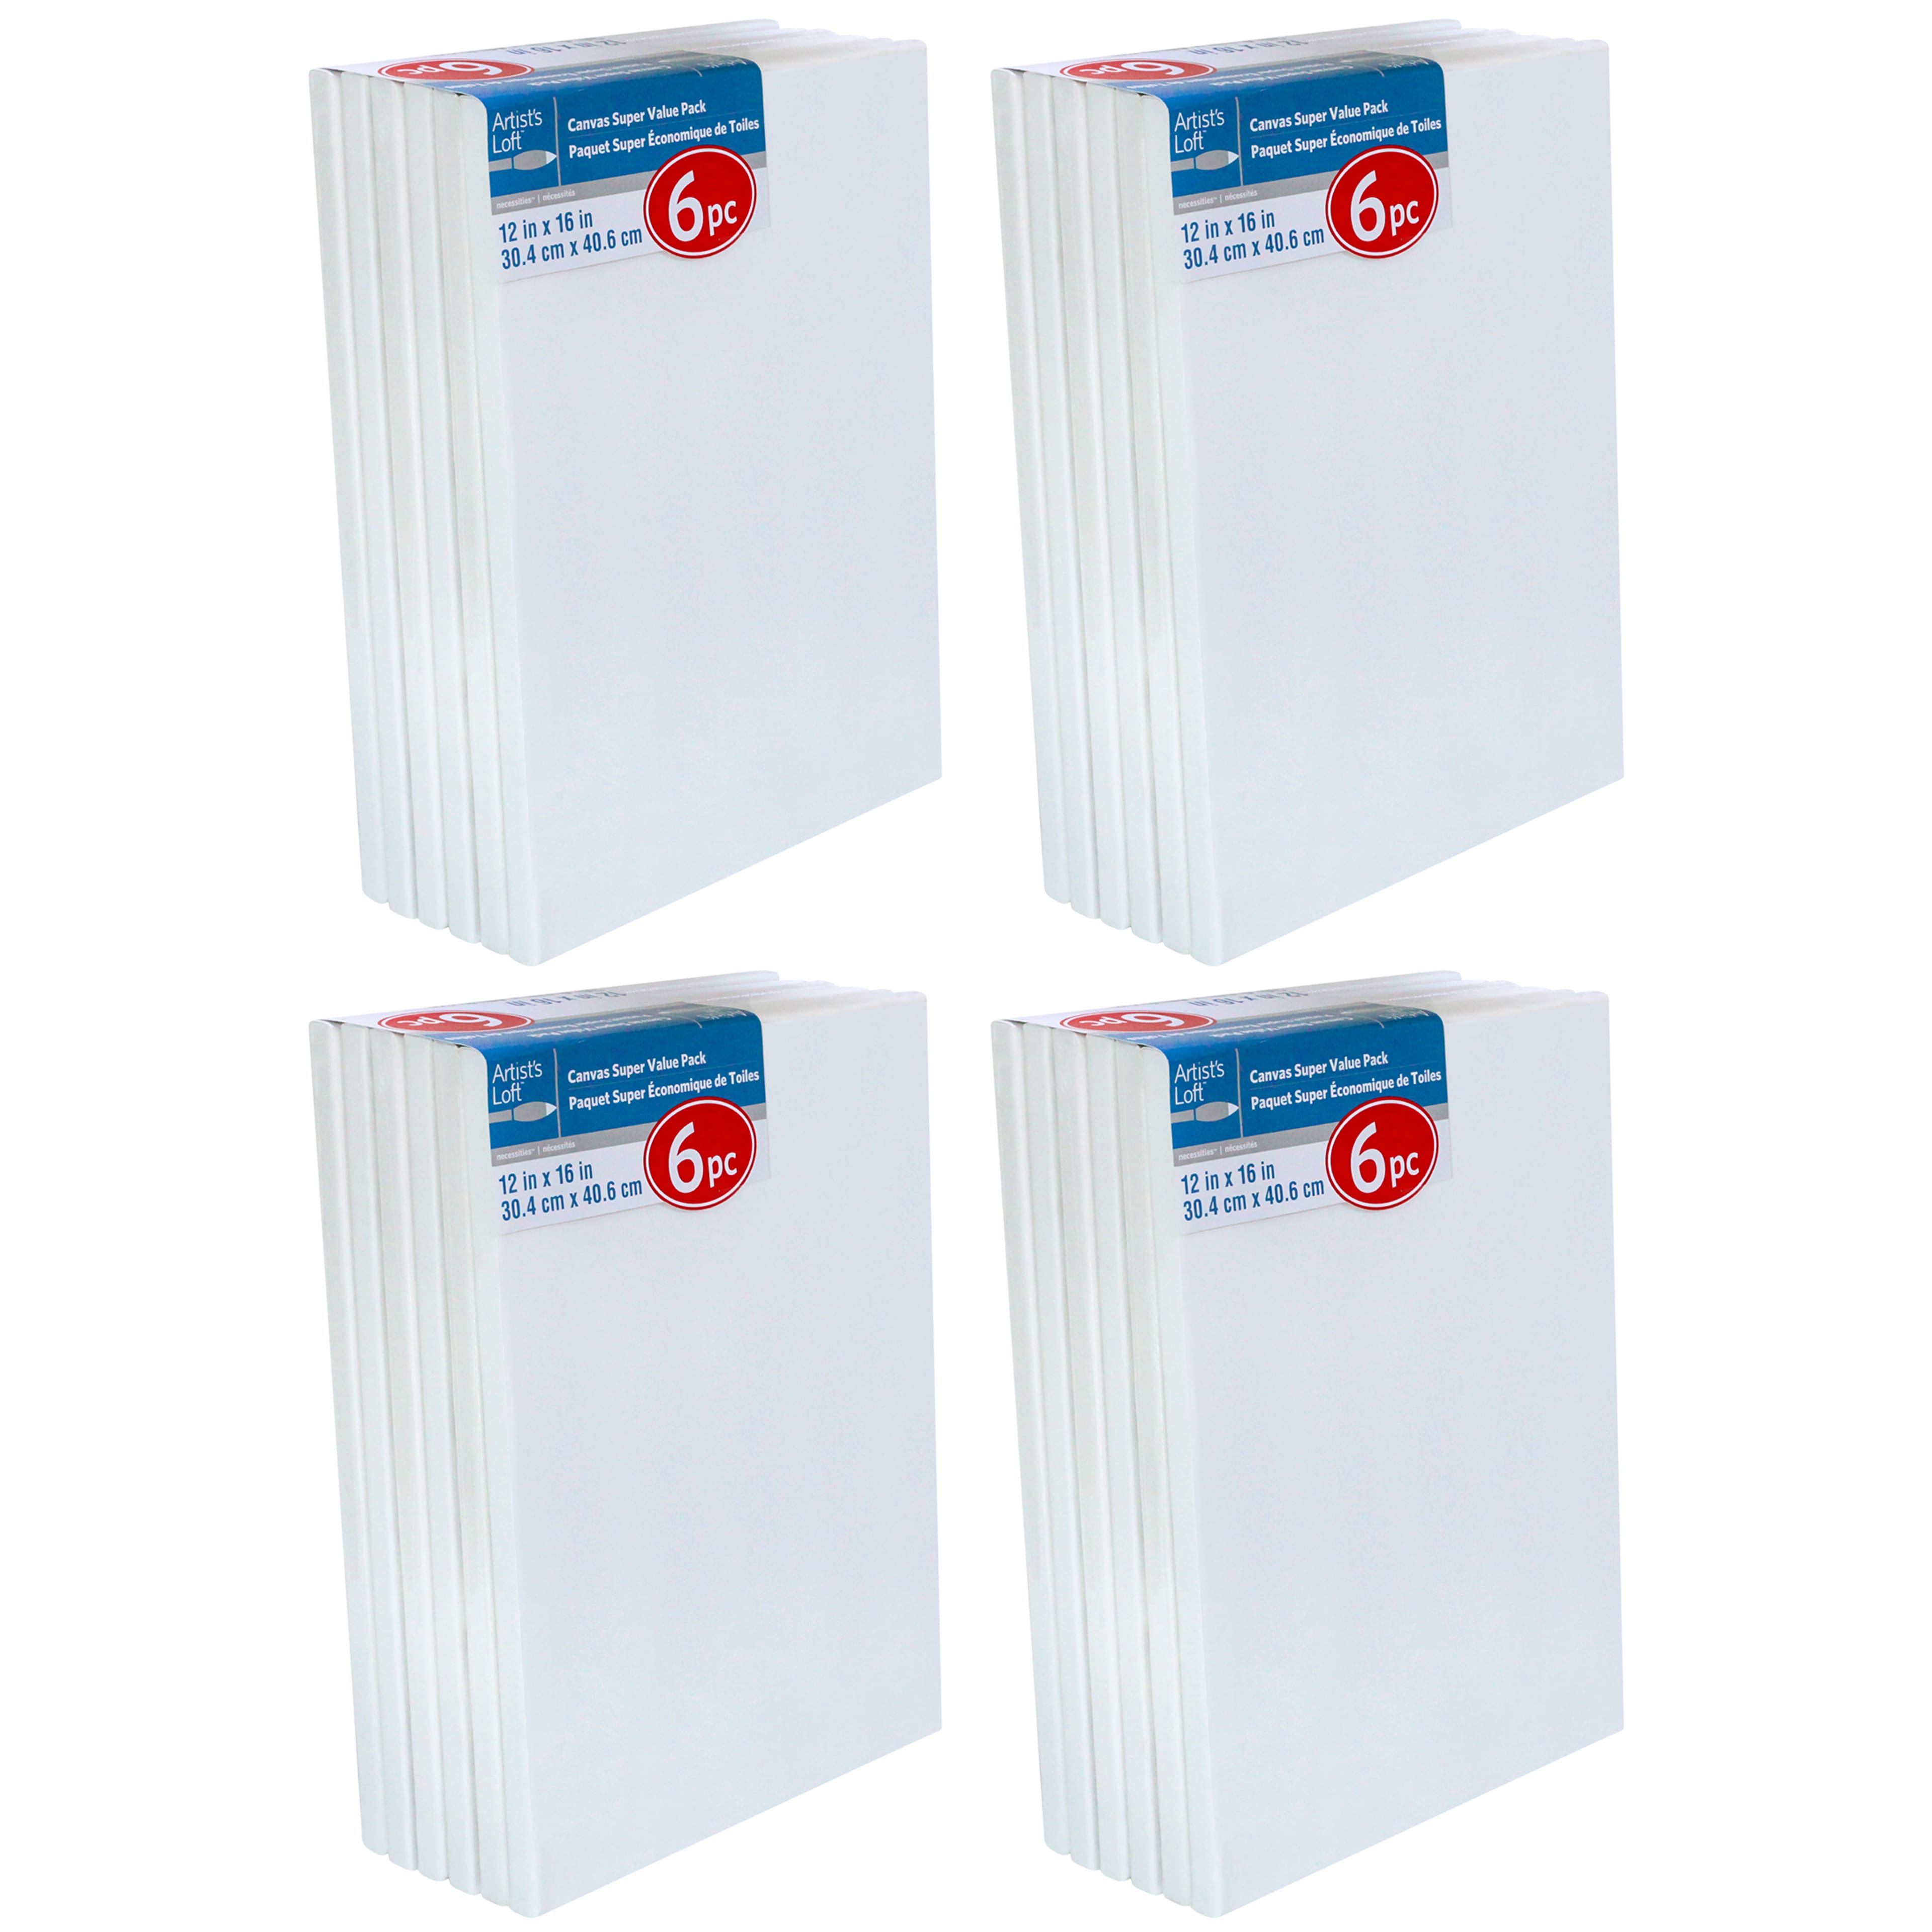 6 Packs: 5 ct. (30 total) Value Pack Canvas Panels by Artist's Loft®  Necessities™